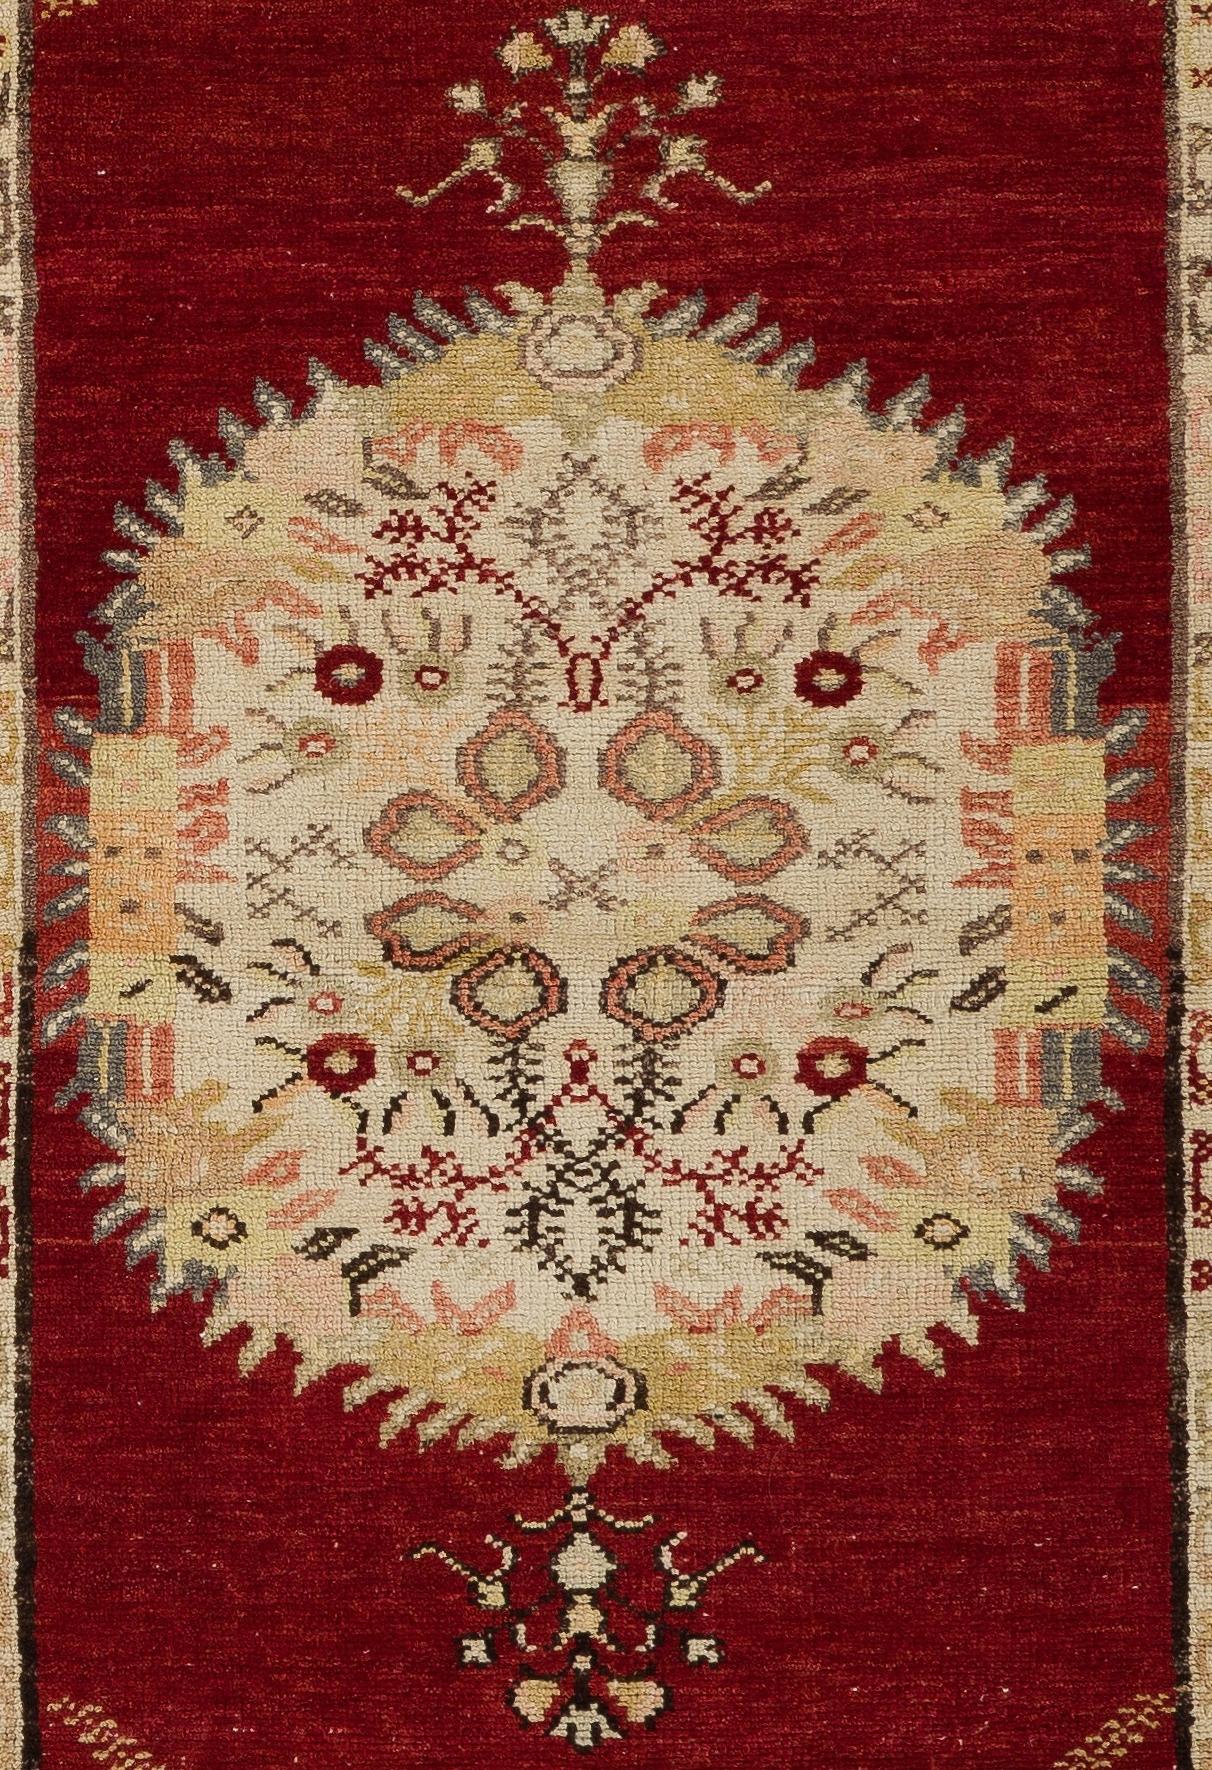 Hand-Knotted 4.3x6.6 Ft One-of-a-Kind Vintage Handmade Turkish Accent Rug in Red & Ivory For Sale